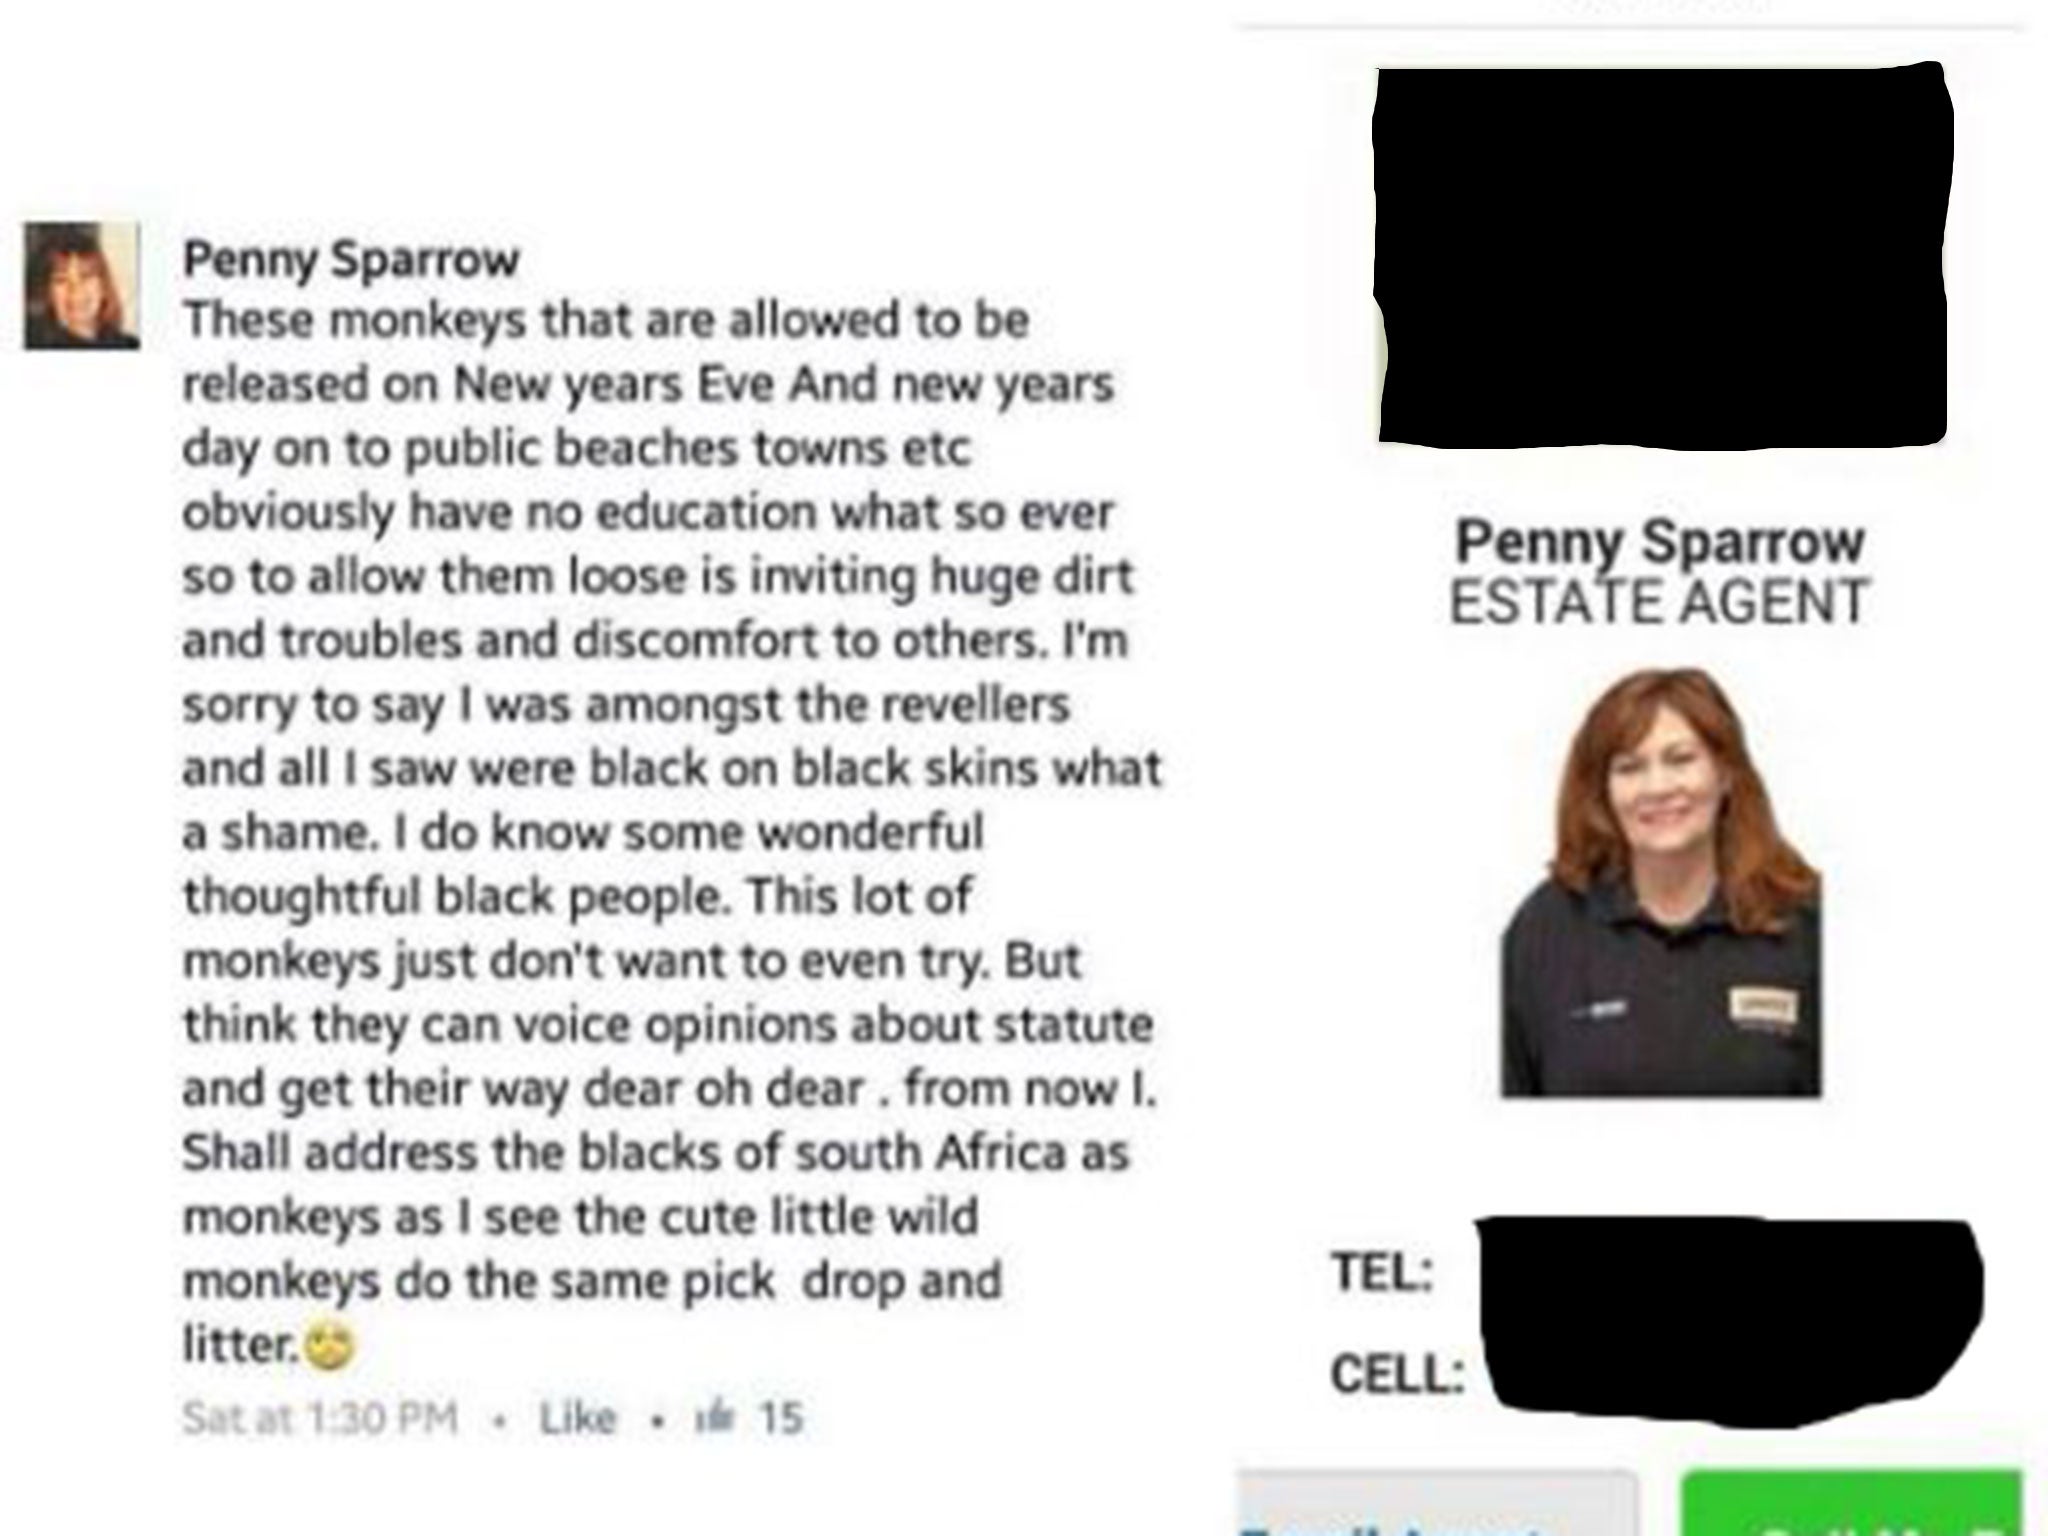 Penny Sparrow faces criminal charges for describing black people as monkeys in a Facebook post